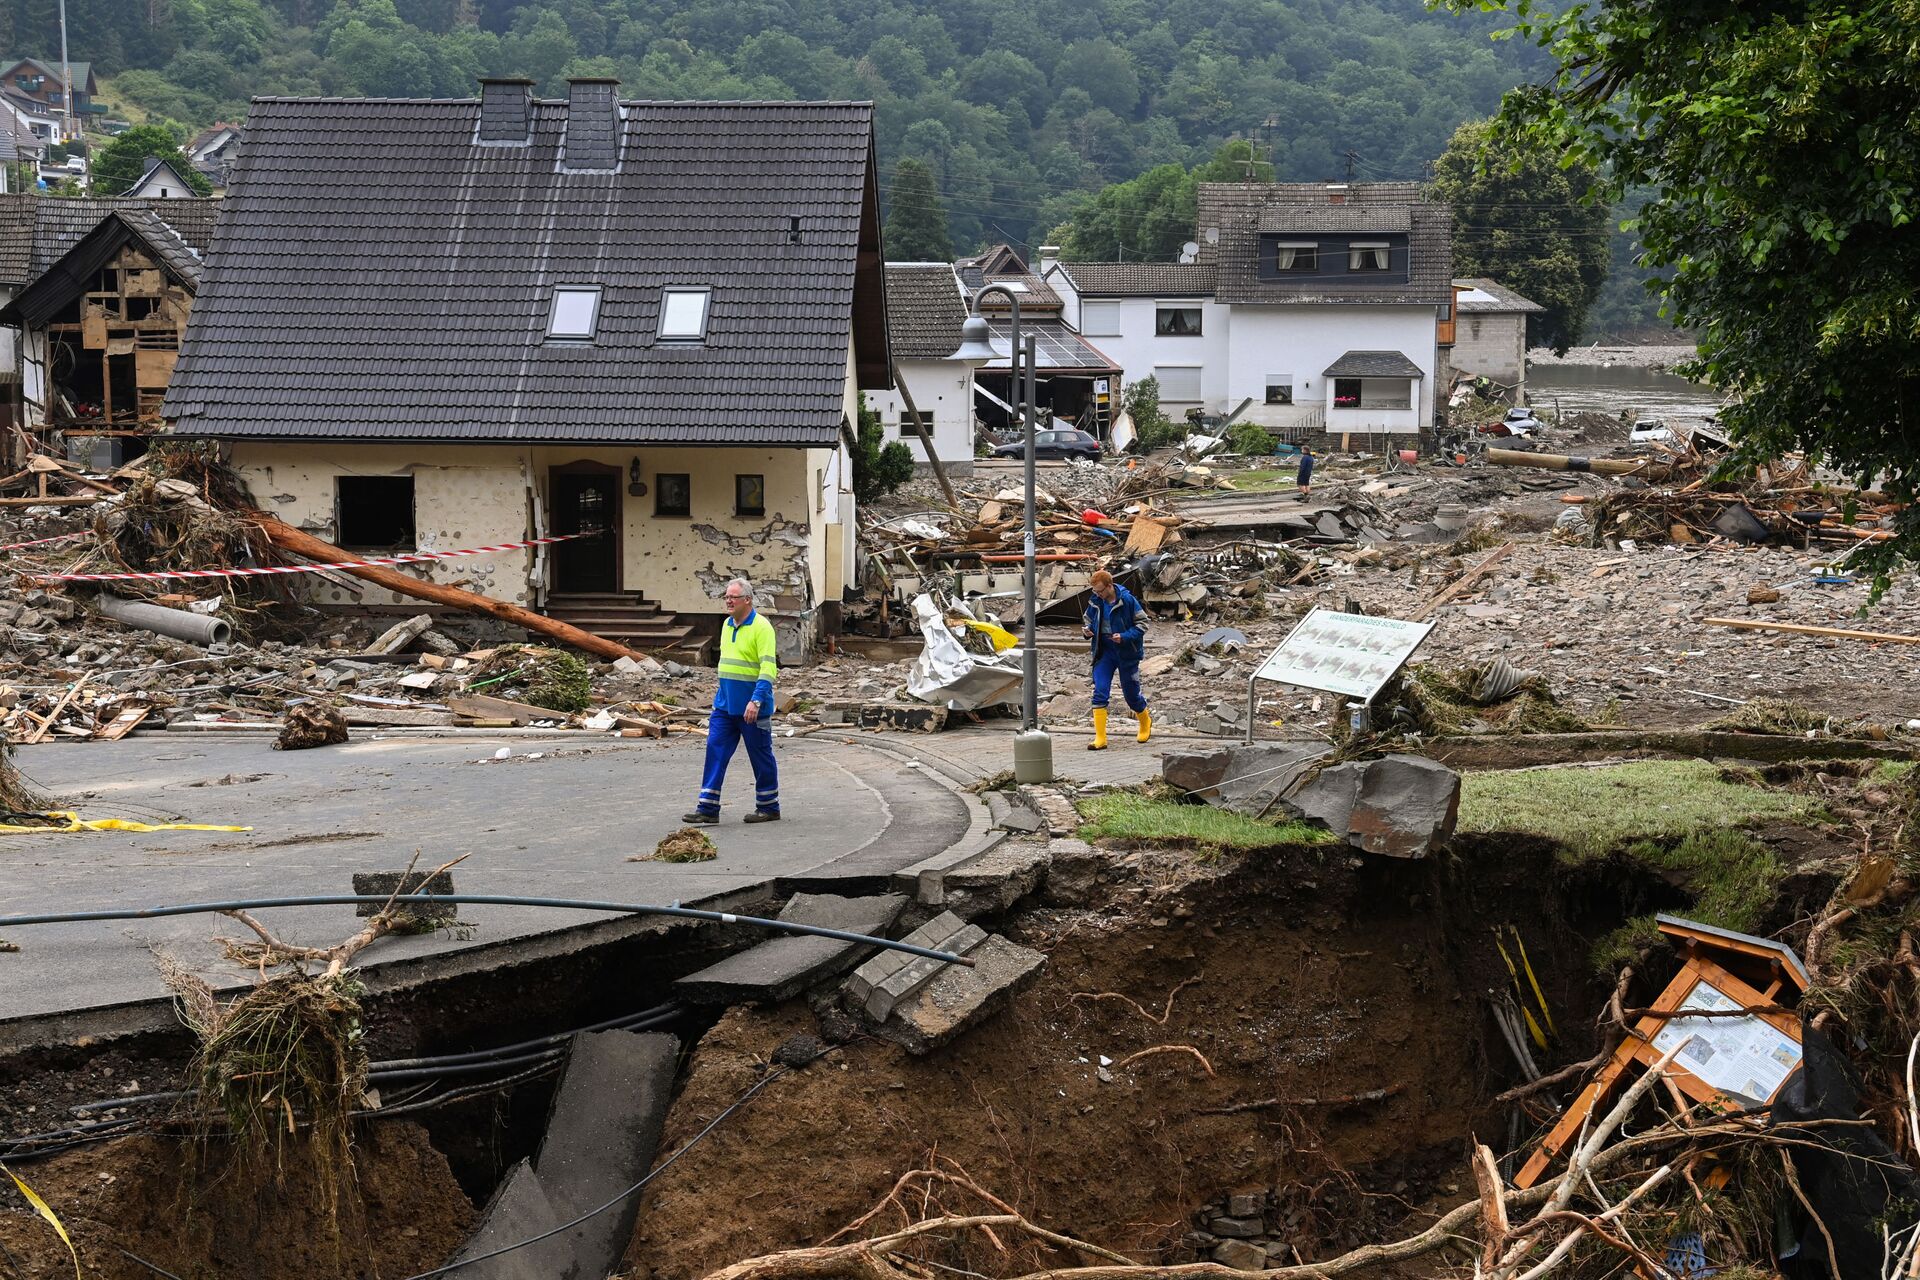 Two men walk on a partially slipped road amid destroyed houses after the floods caused major damage in Schuld near Bad Neuenahr-Ahrweiler, western Germany, on July 16, 2021. - Sputnik International, 1920, 07.09.2021